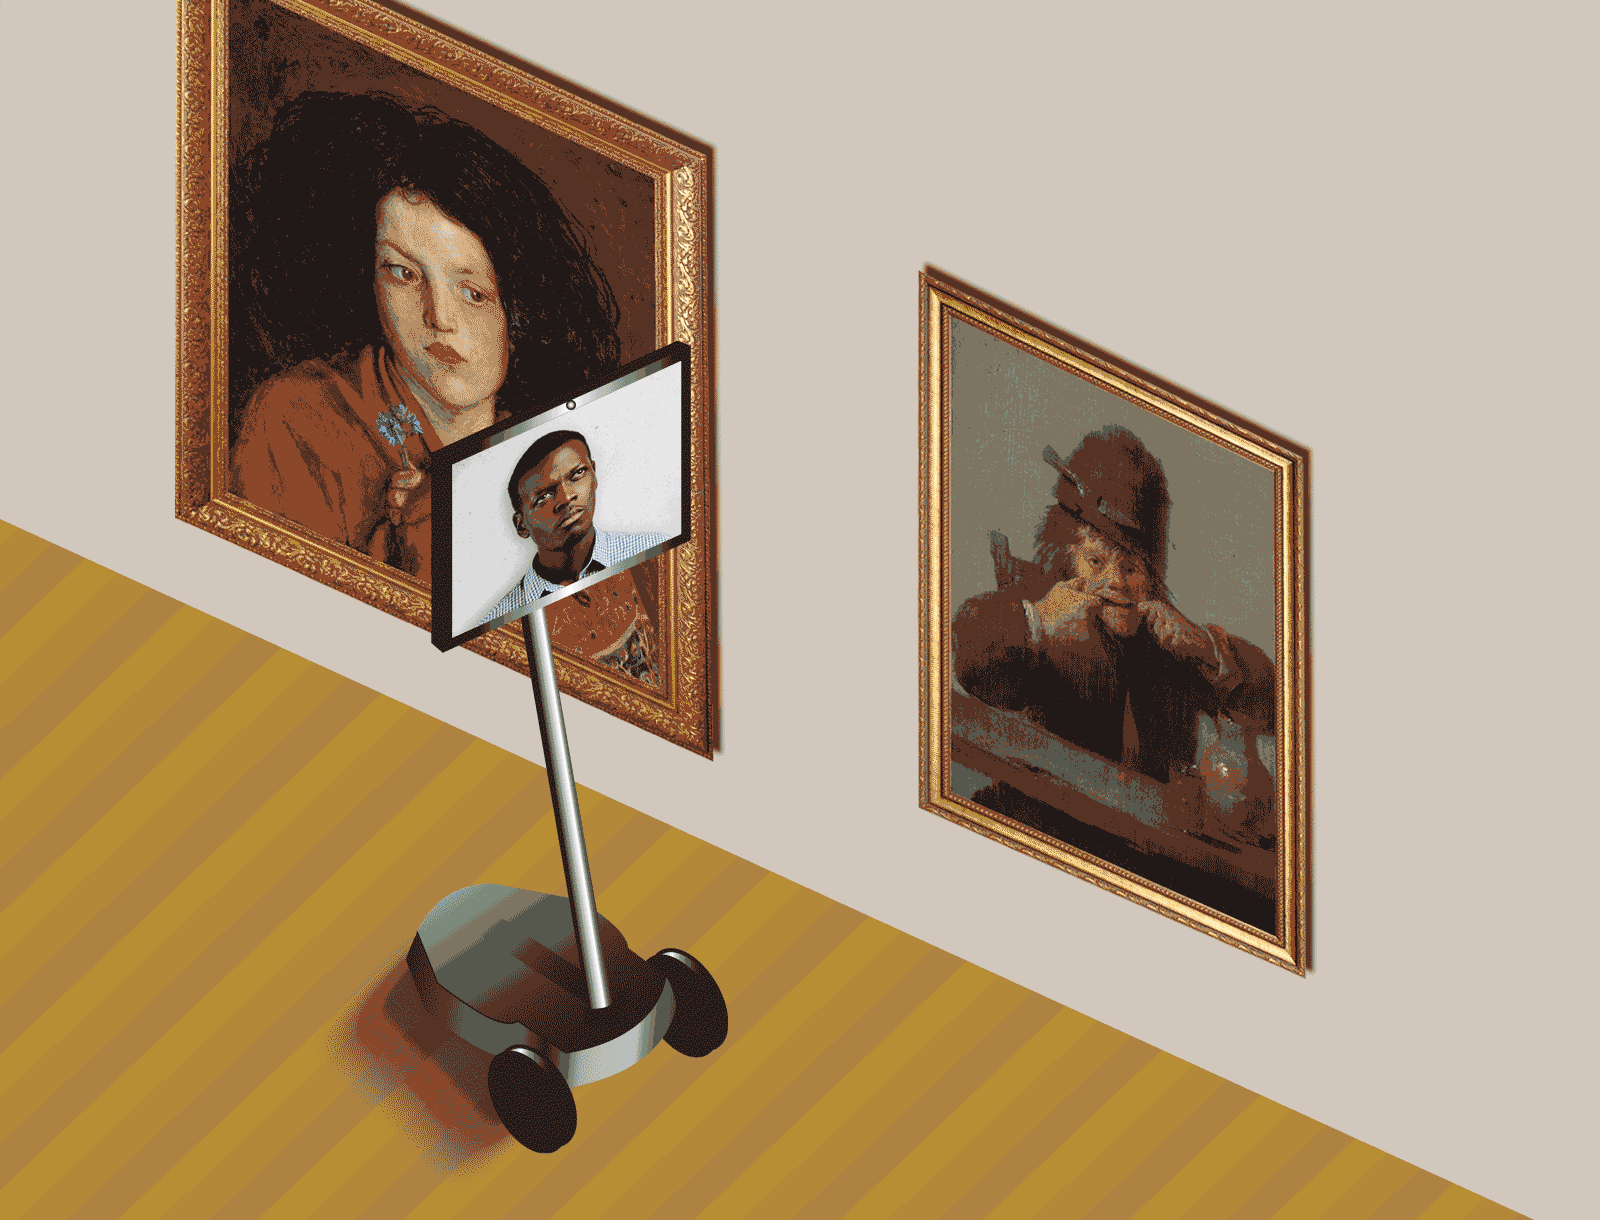 GIF of a robot rolling past paintings in an art gallery with a man’s face changing expressions on the robot screen